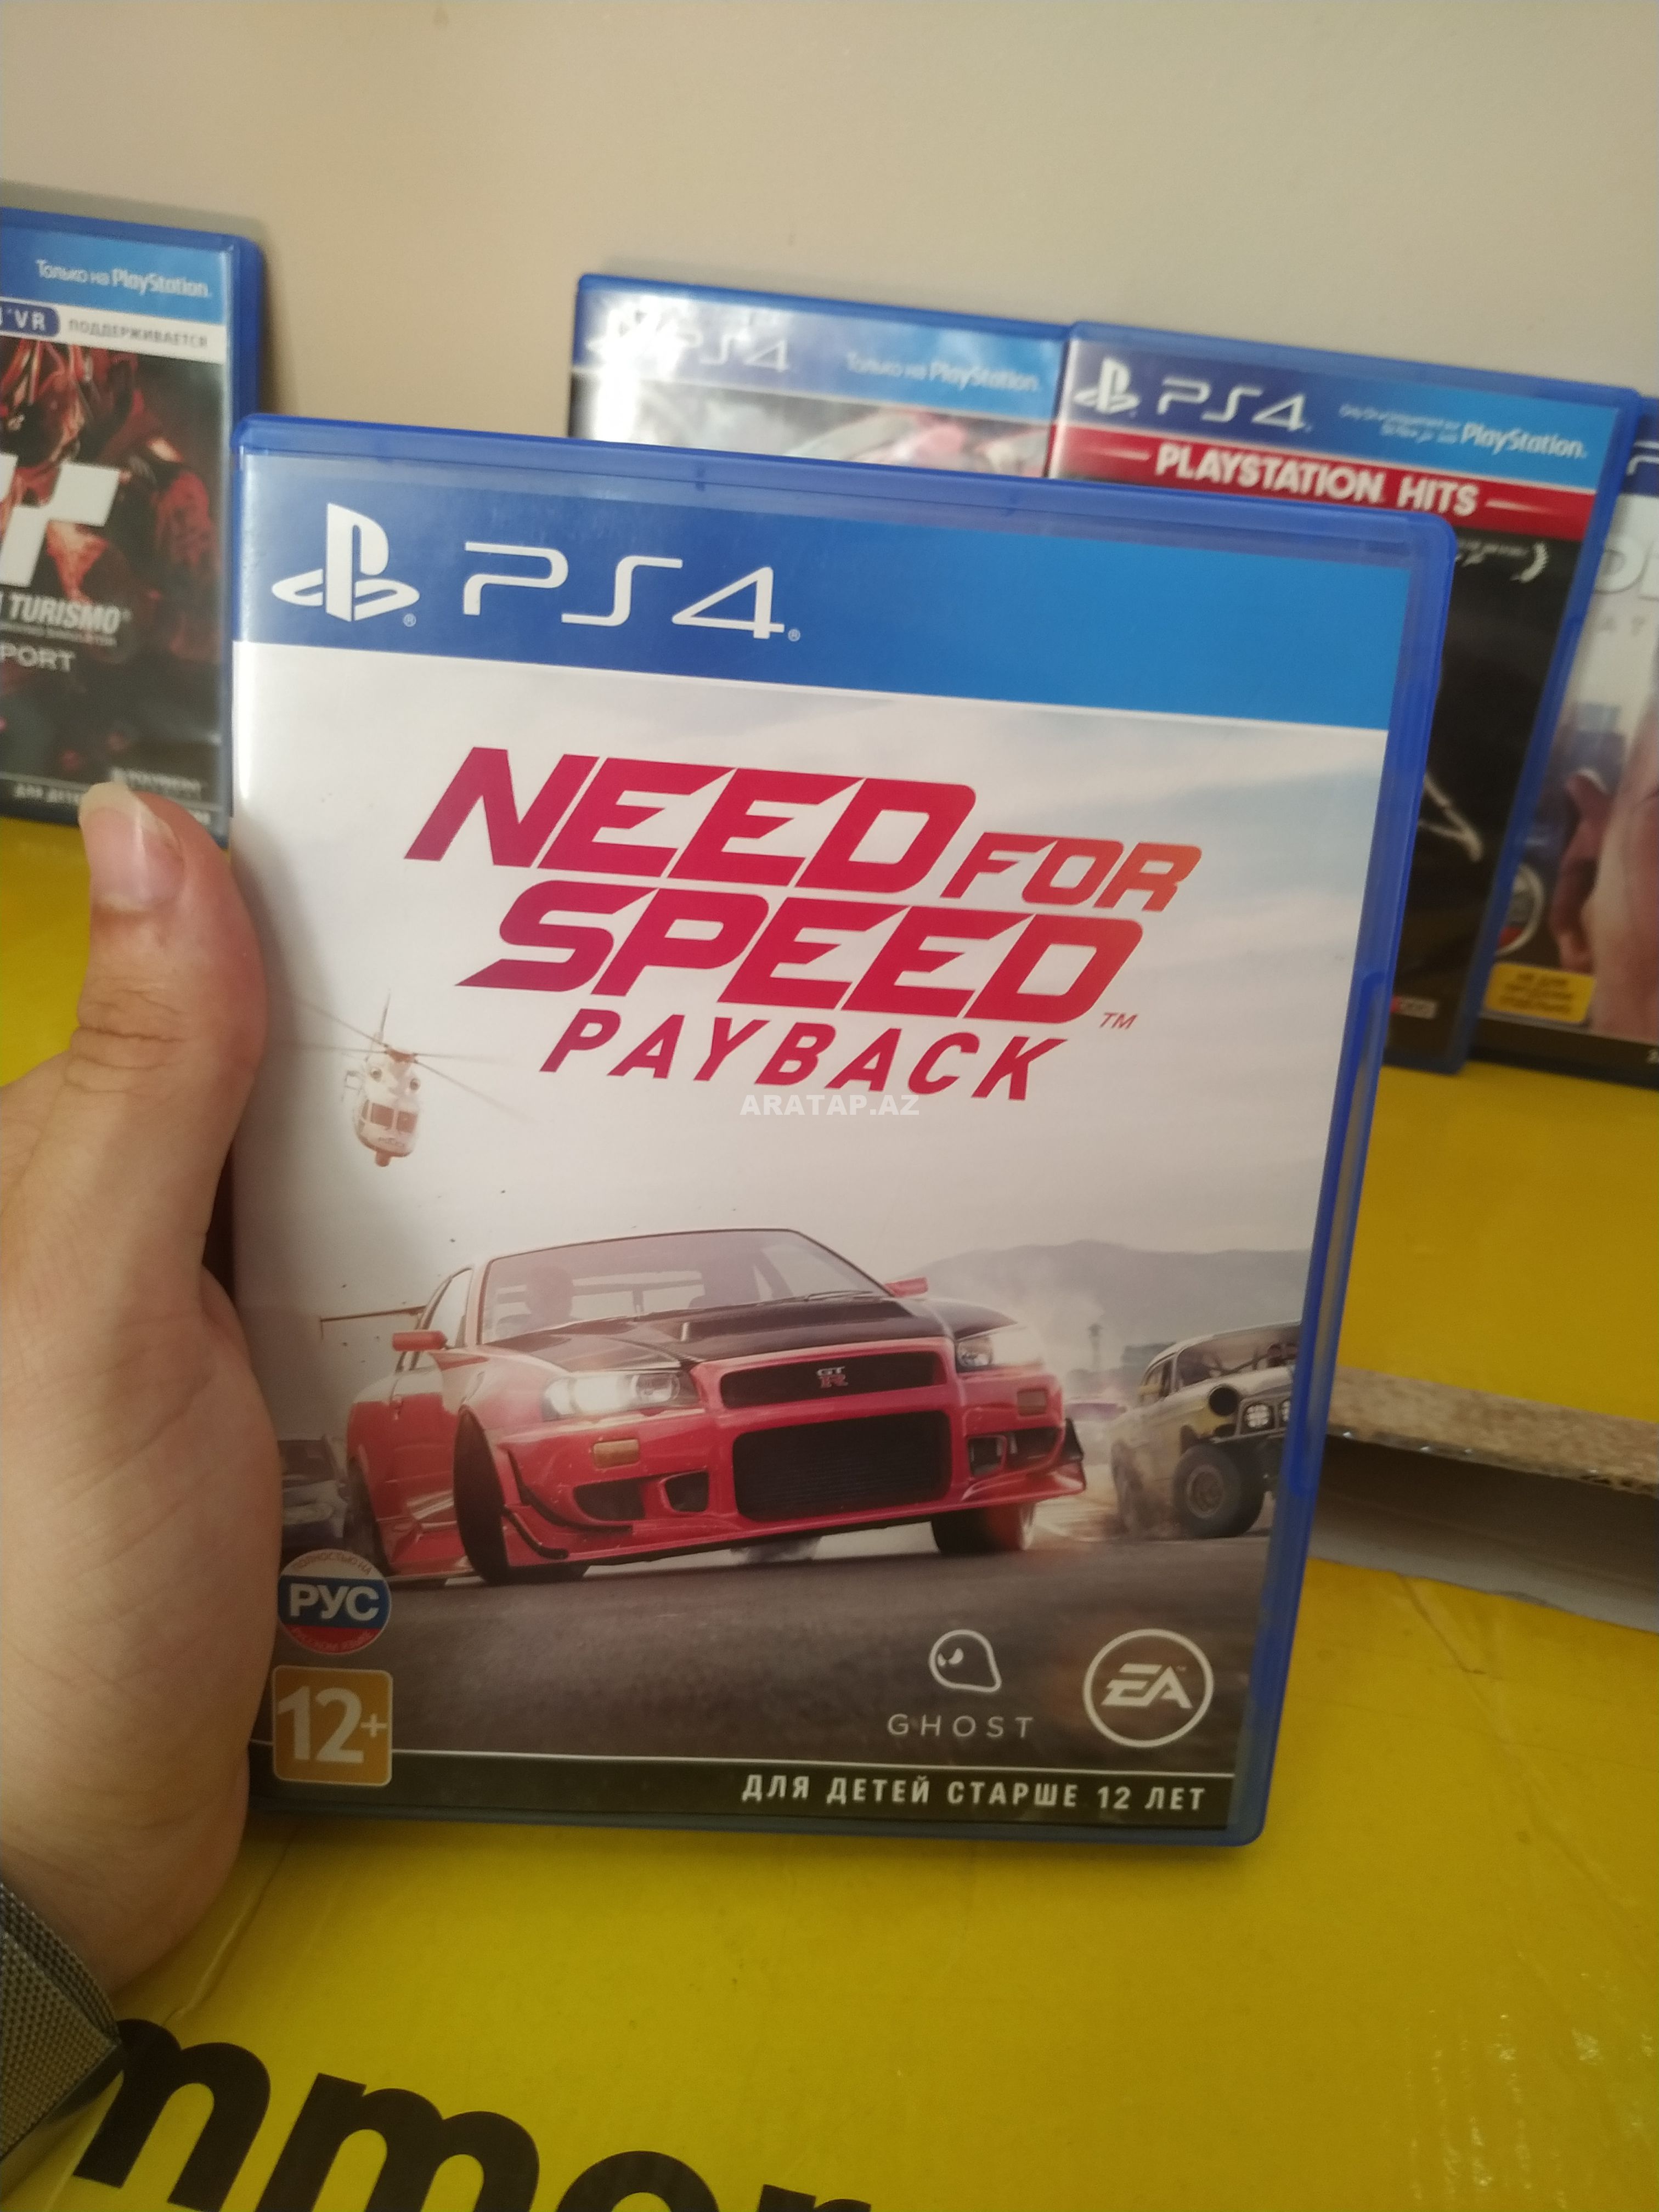 Sony Playstation 4 "NEED FOR SPEED PAYBACK" Oyun Diski